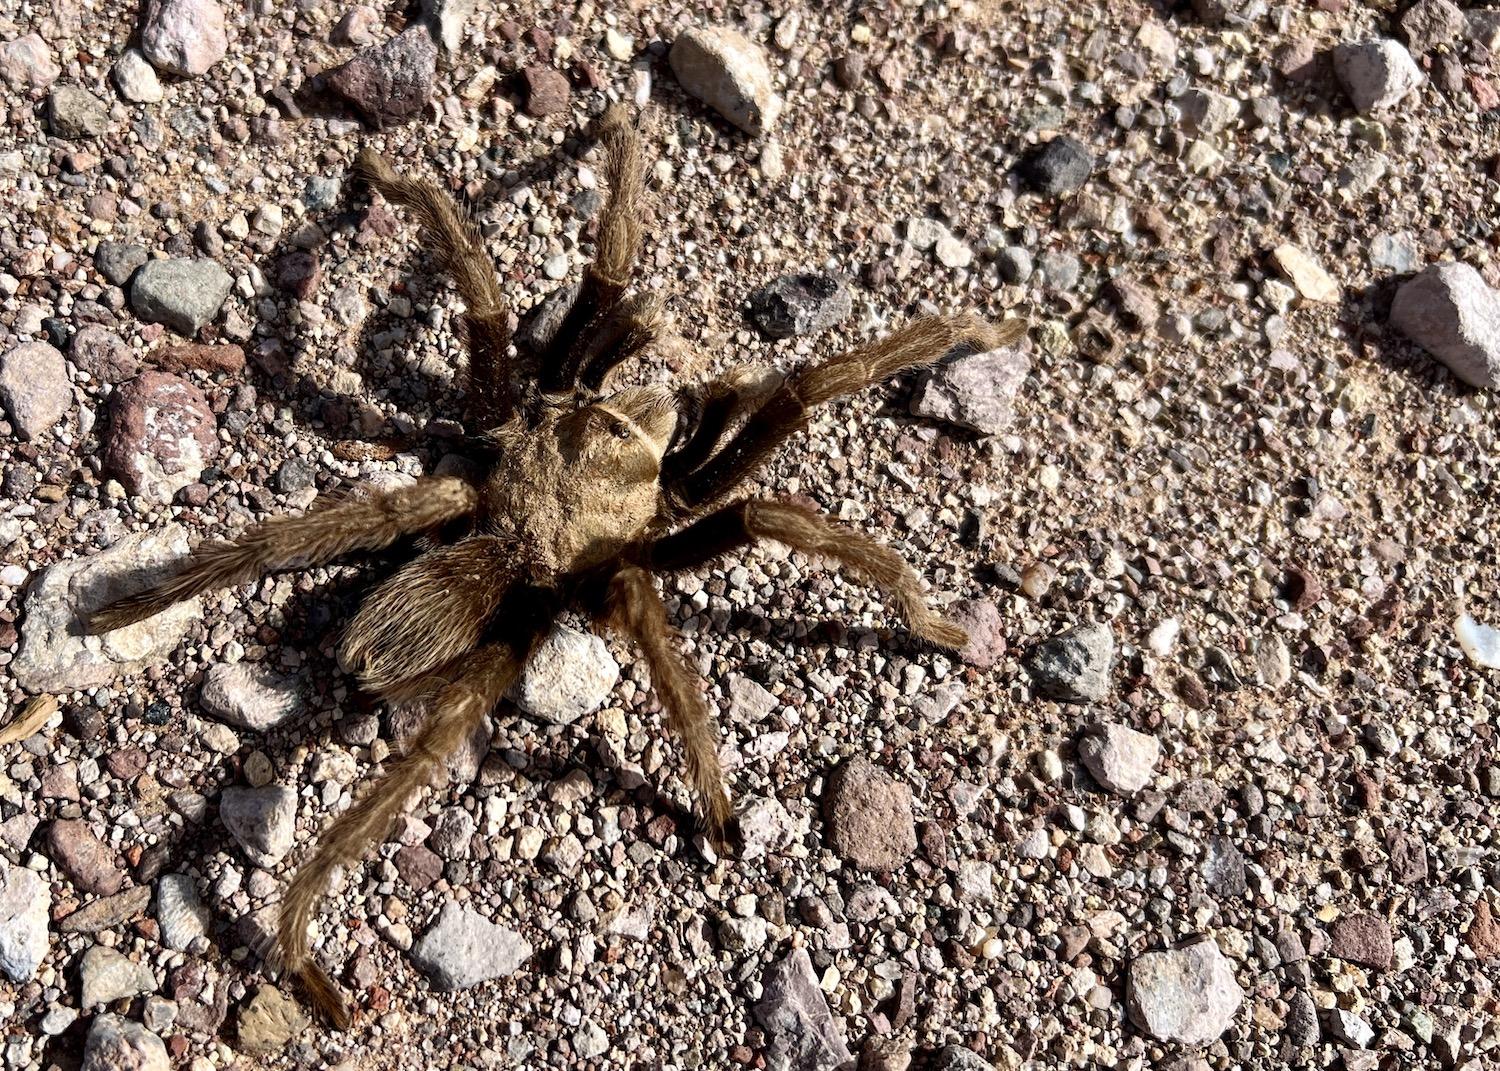 We kept a respectful distance when watching this tarantula cross the road on Ajo Mountain Drive.